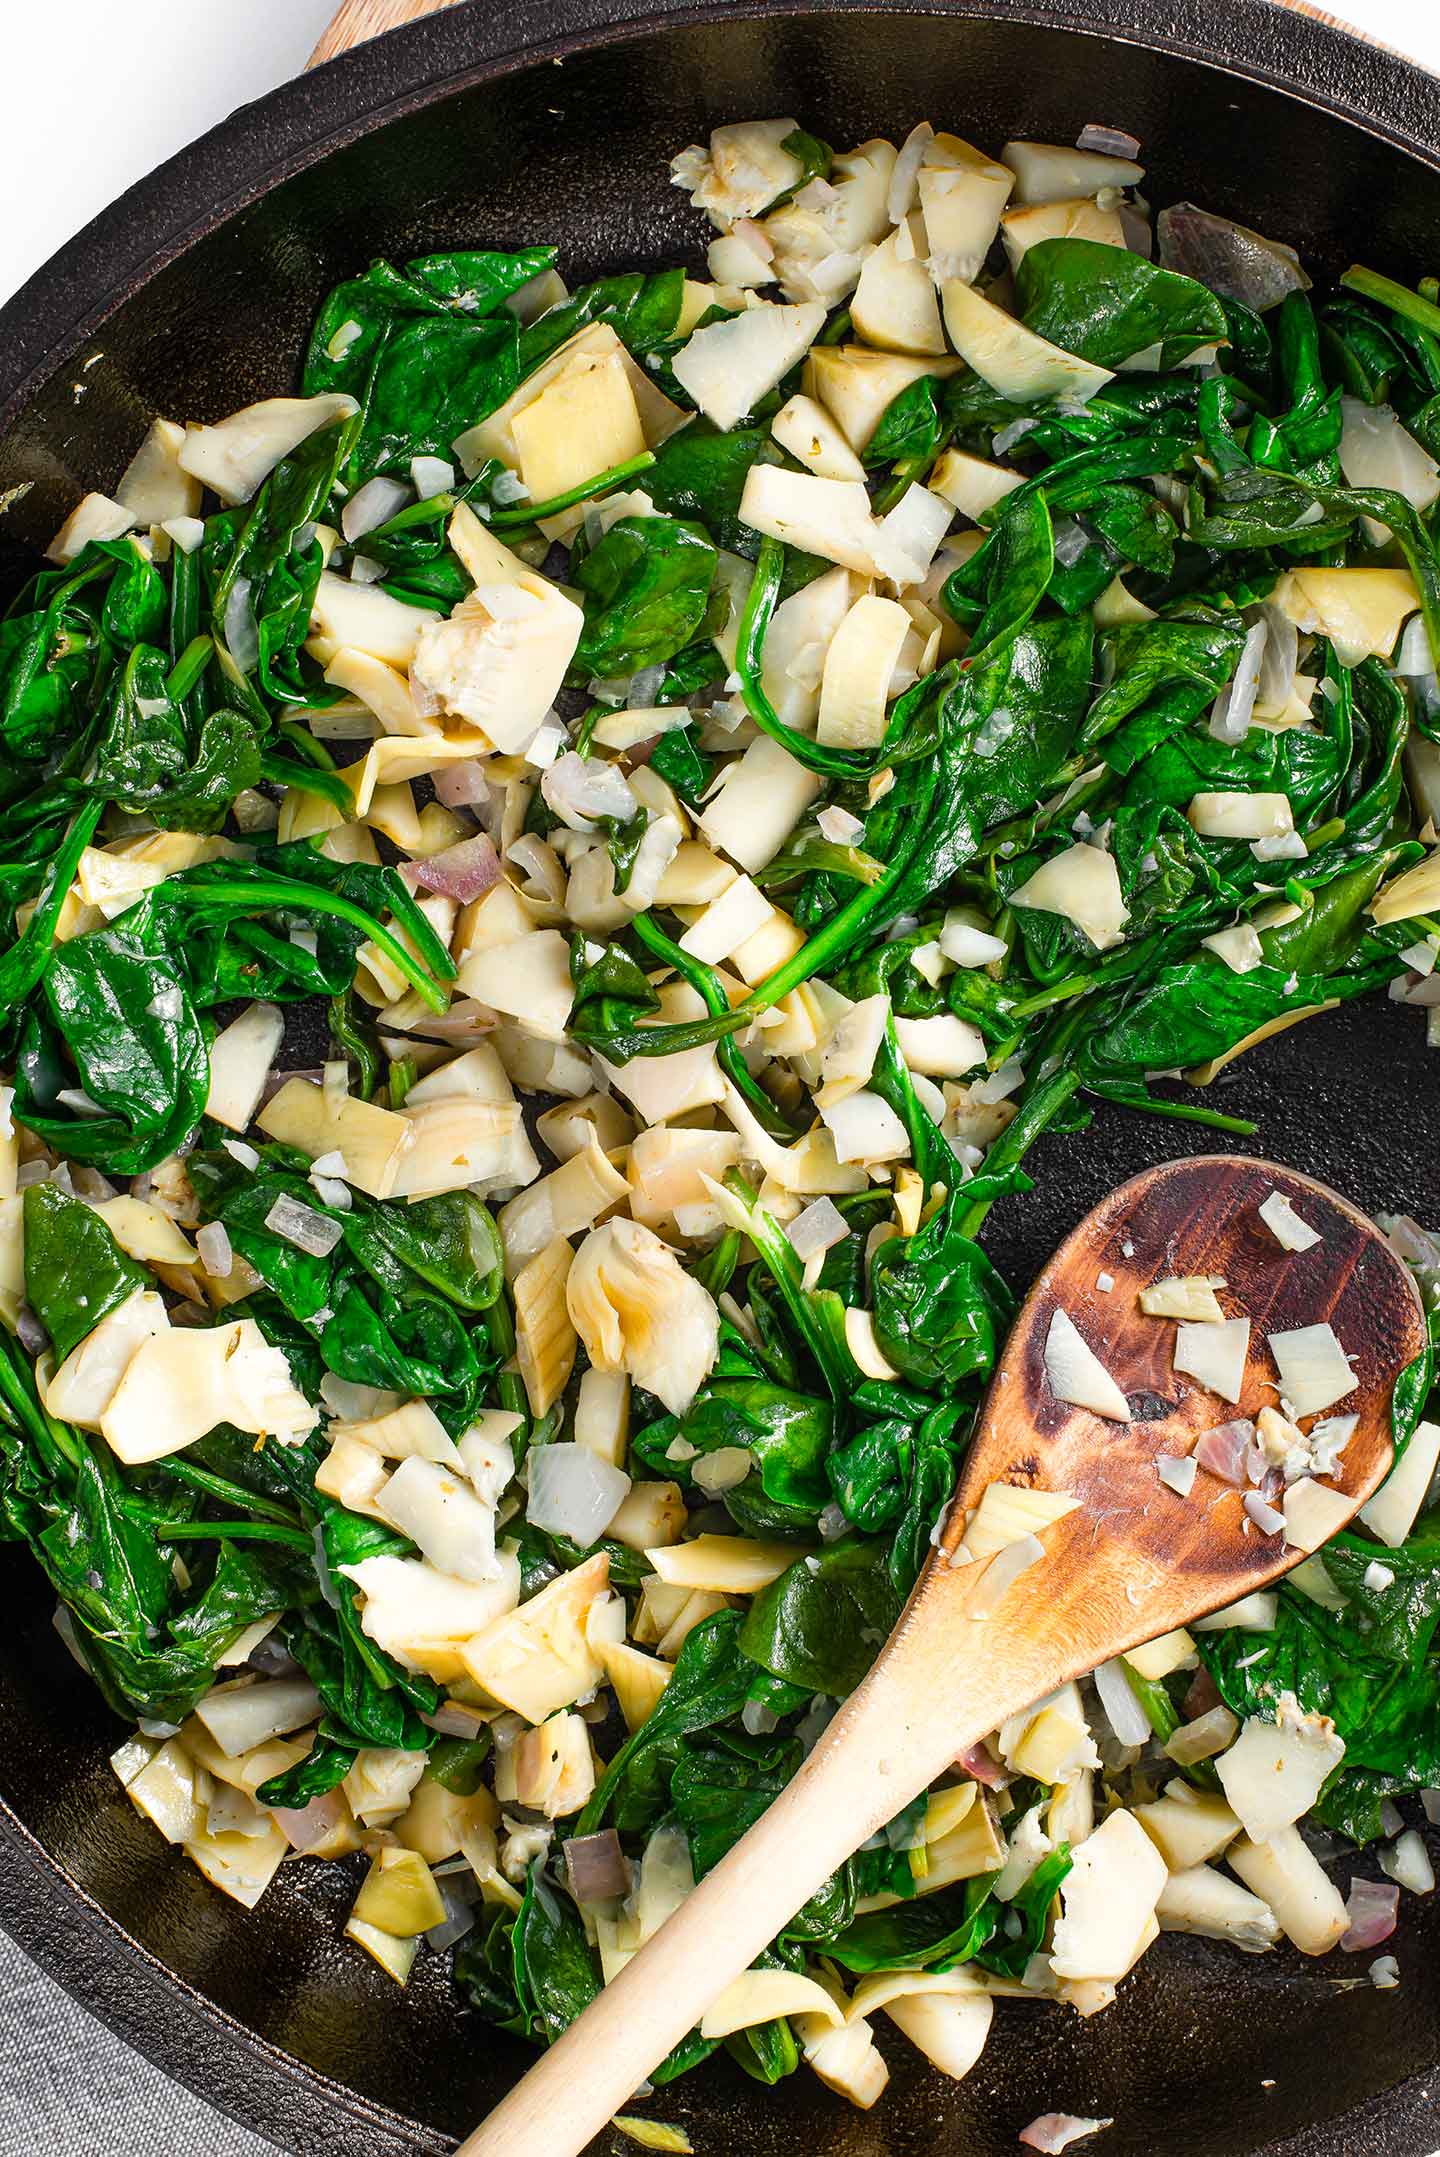 Top down view of wilted spinach and chopped artichoke hearts in a skillet with a wooden spoon.